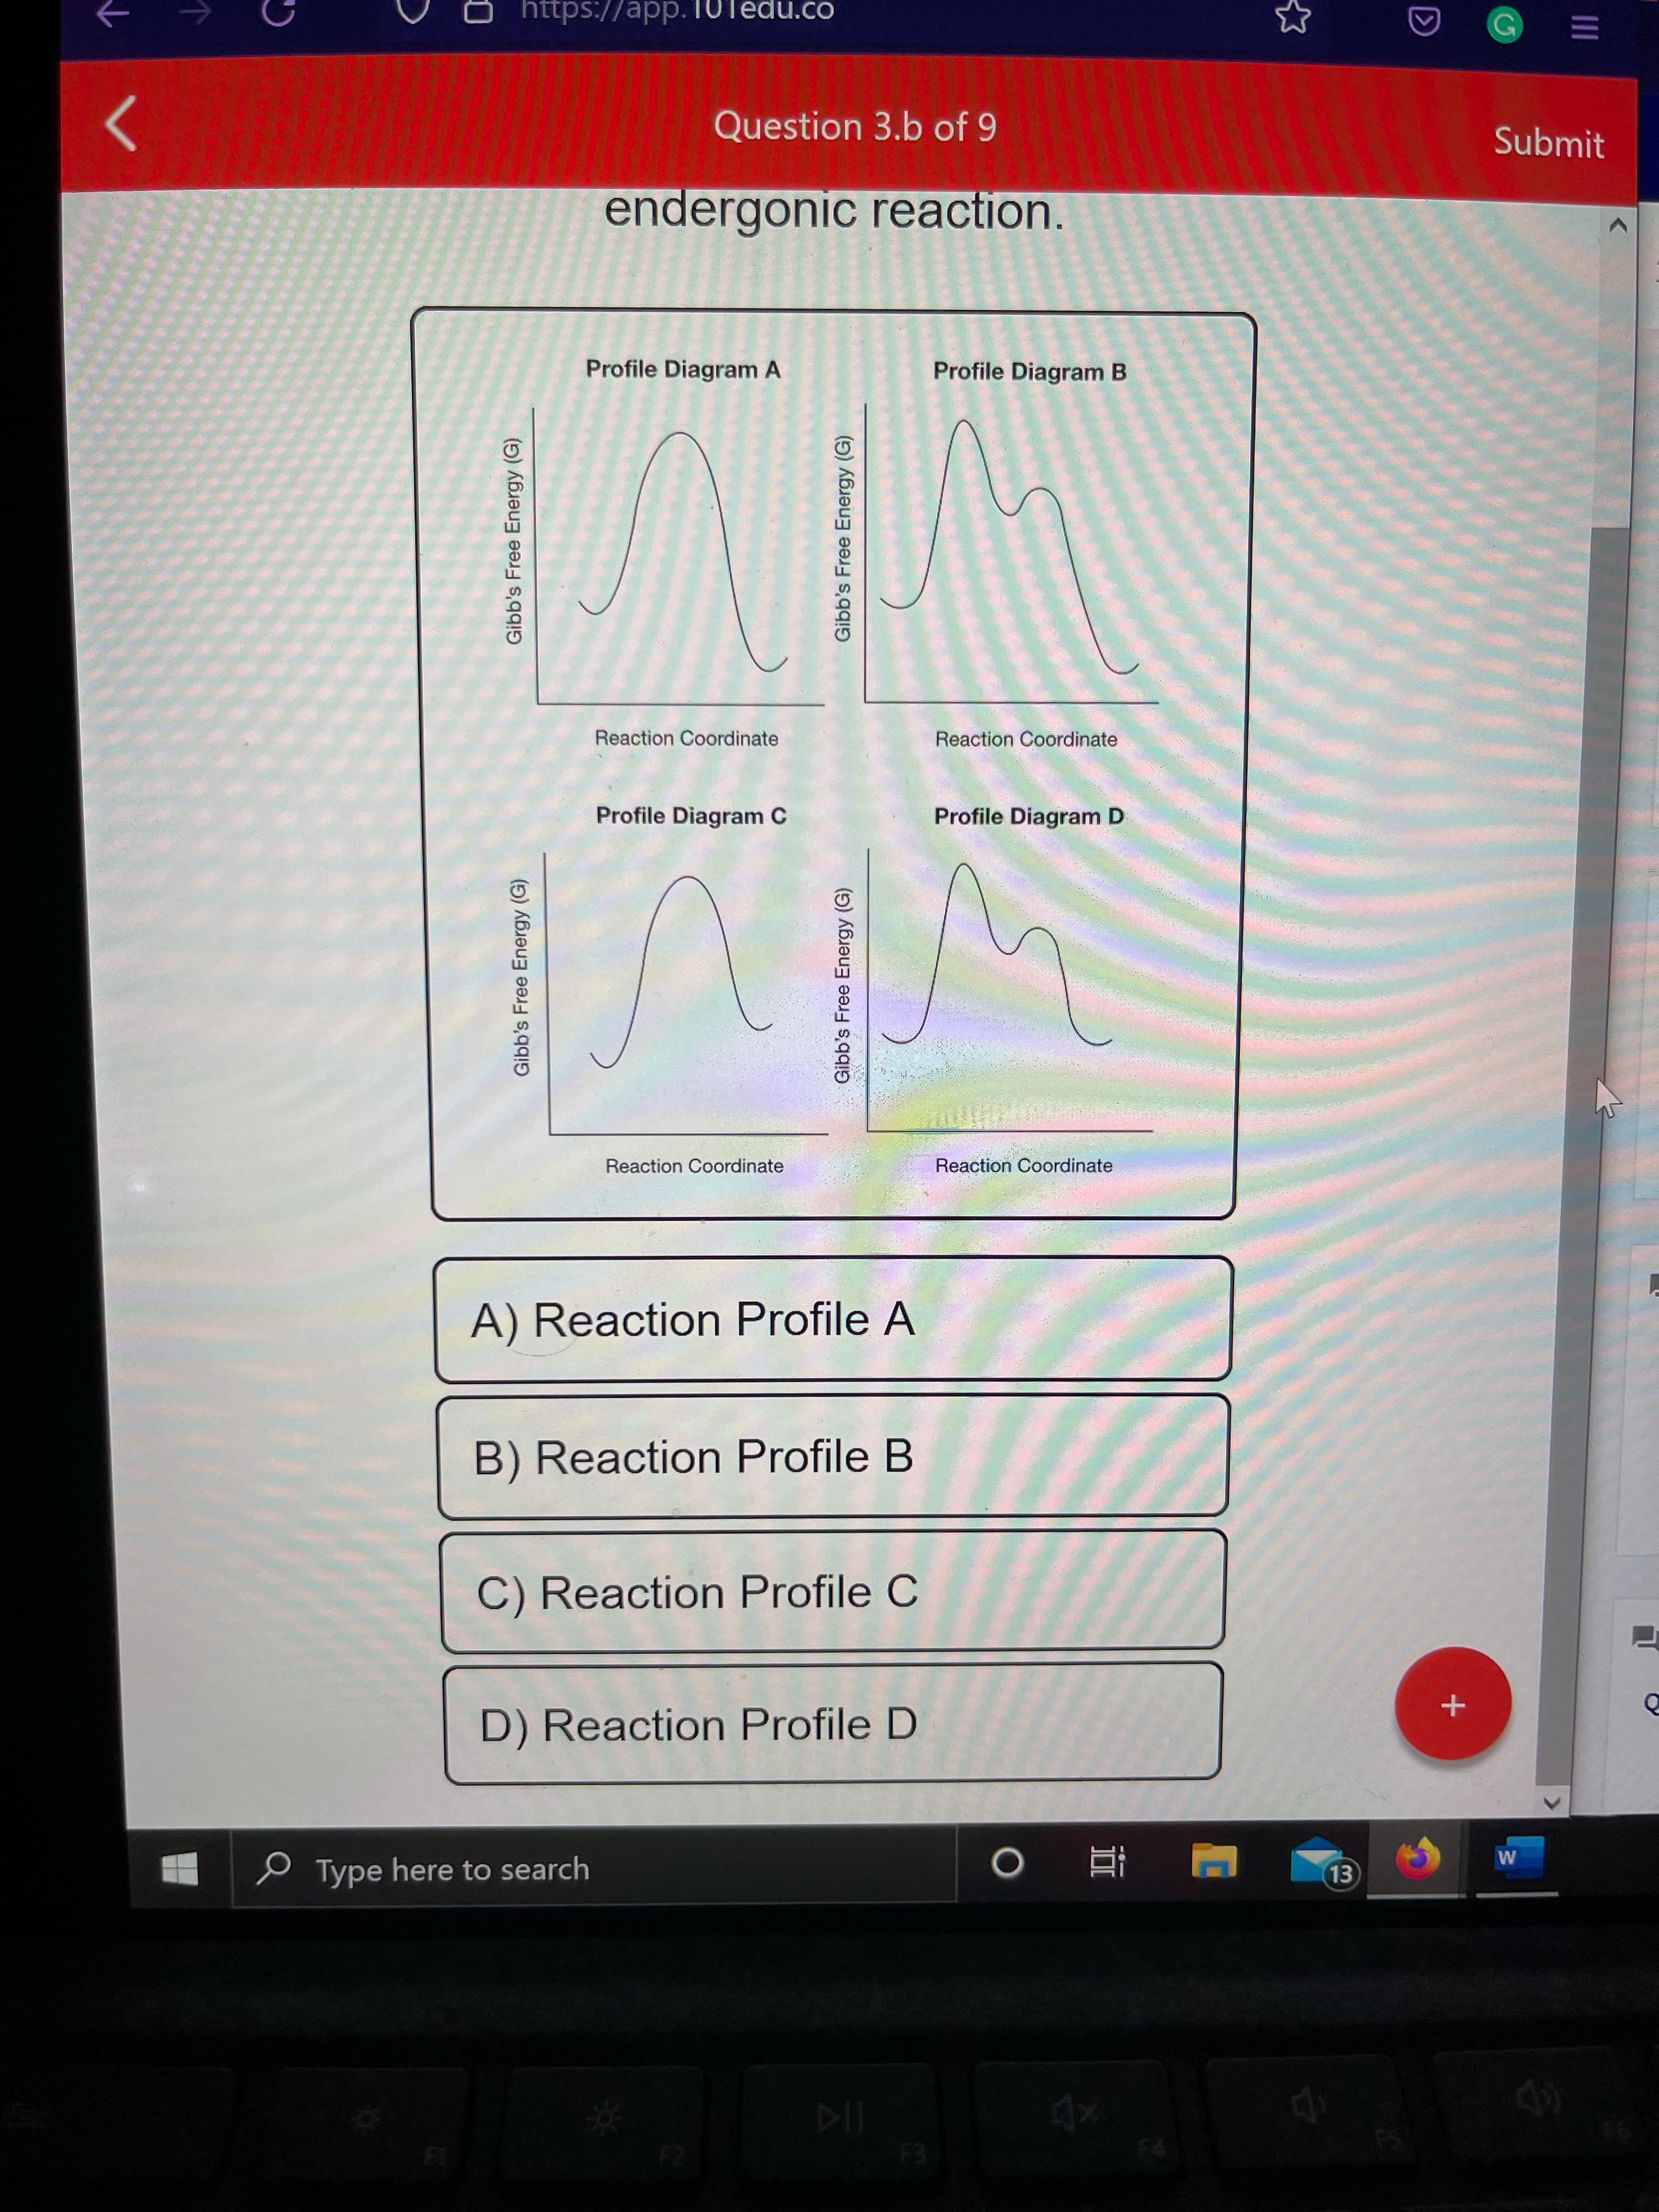 Gibb's Free Energy (G)
Gibb's Free Energy (G)
Gibb's Free Energy (G)
Gibb's Free Energy (G)
https://app.10Tedu.co
Question 3.b of 9
Submit
endergonic reaction.
Profile Diagram A
Profile Diagram B
Reaction Coordinate
Reaction Coordinate
Profile Diagram C
Profile Diagram D
Reaction Coordinate
Reaction Coordinate
A) Reaction Profile A
B) Reaction Profile B
C) Reaction Profile C
D) Reaction Profile D
P Type here to search
直 0
|近
F2
